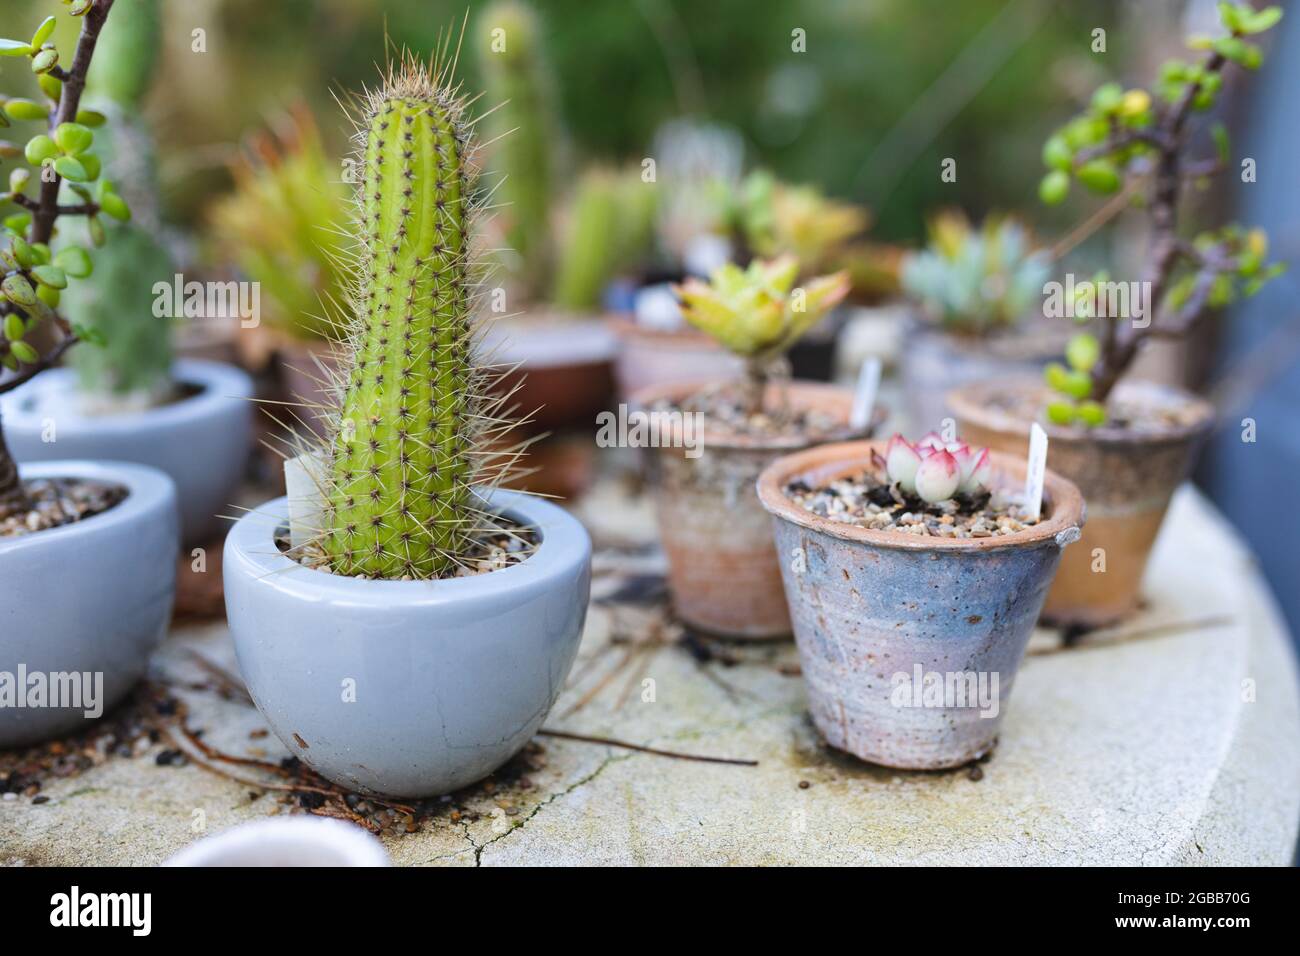 Various succulents and cacti plants growing in pots at garden centre Stock Photo